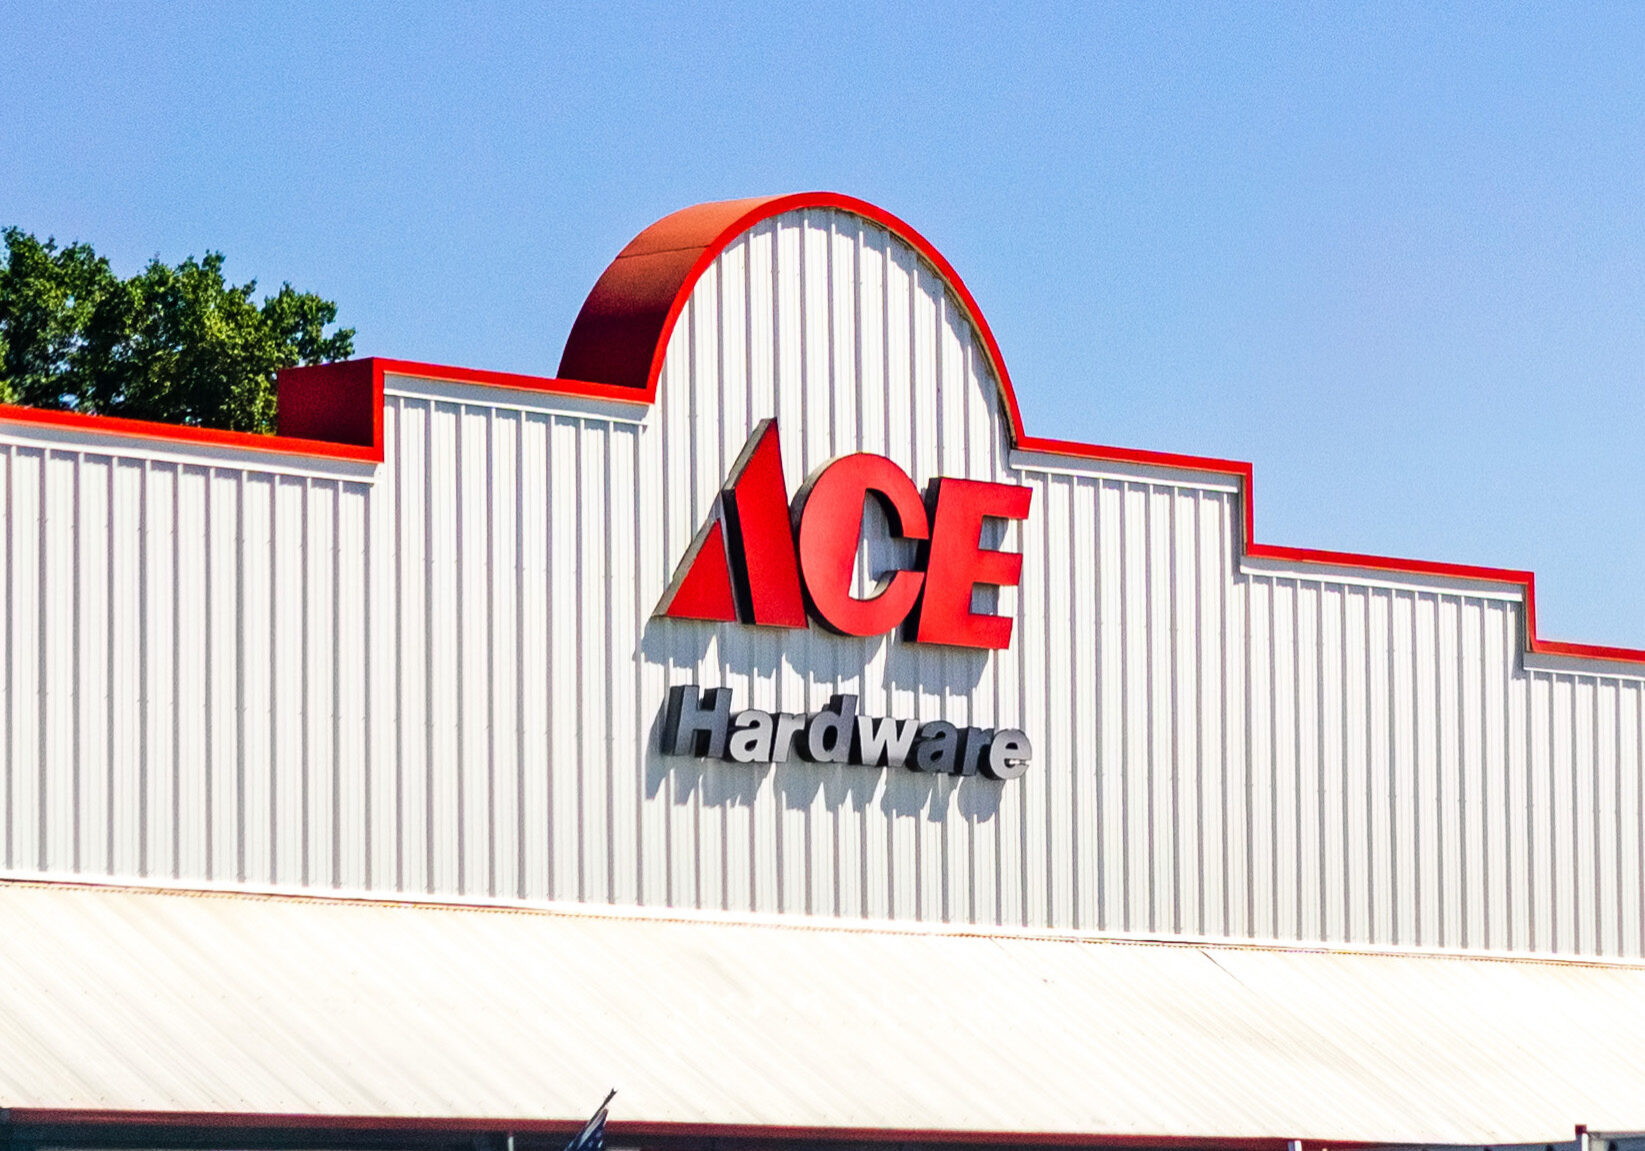 June 26, 2019 Oakdale / CA / USA - ACE Hardware store entrance; ACE Hardware is the world's largest hardware retail cooperative